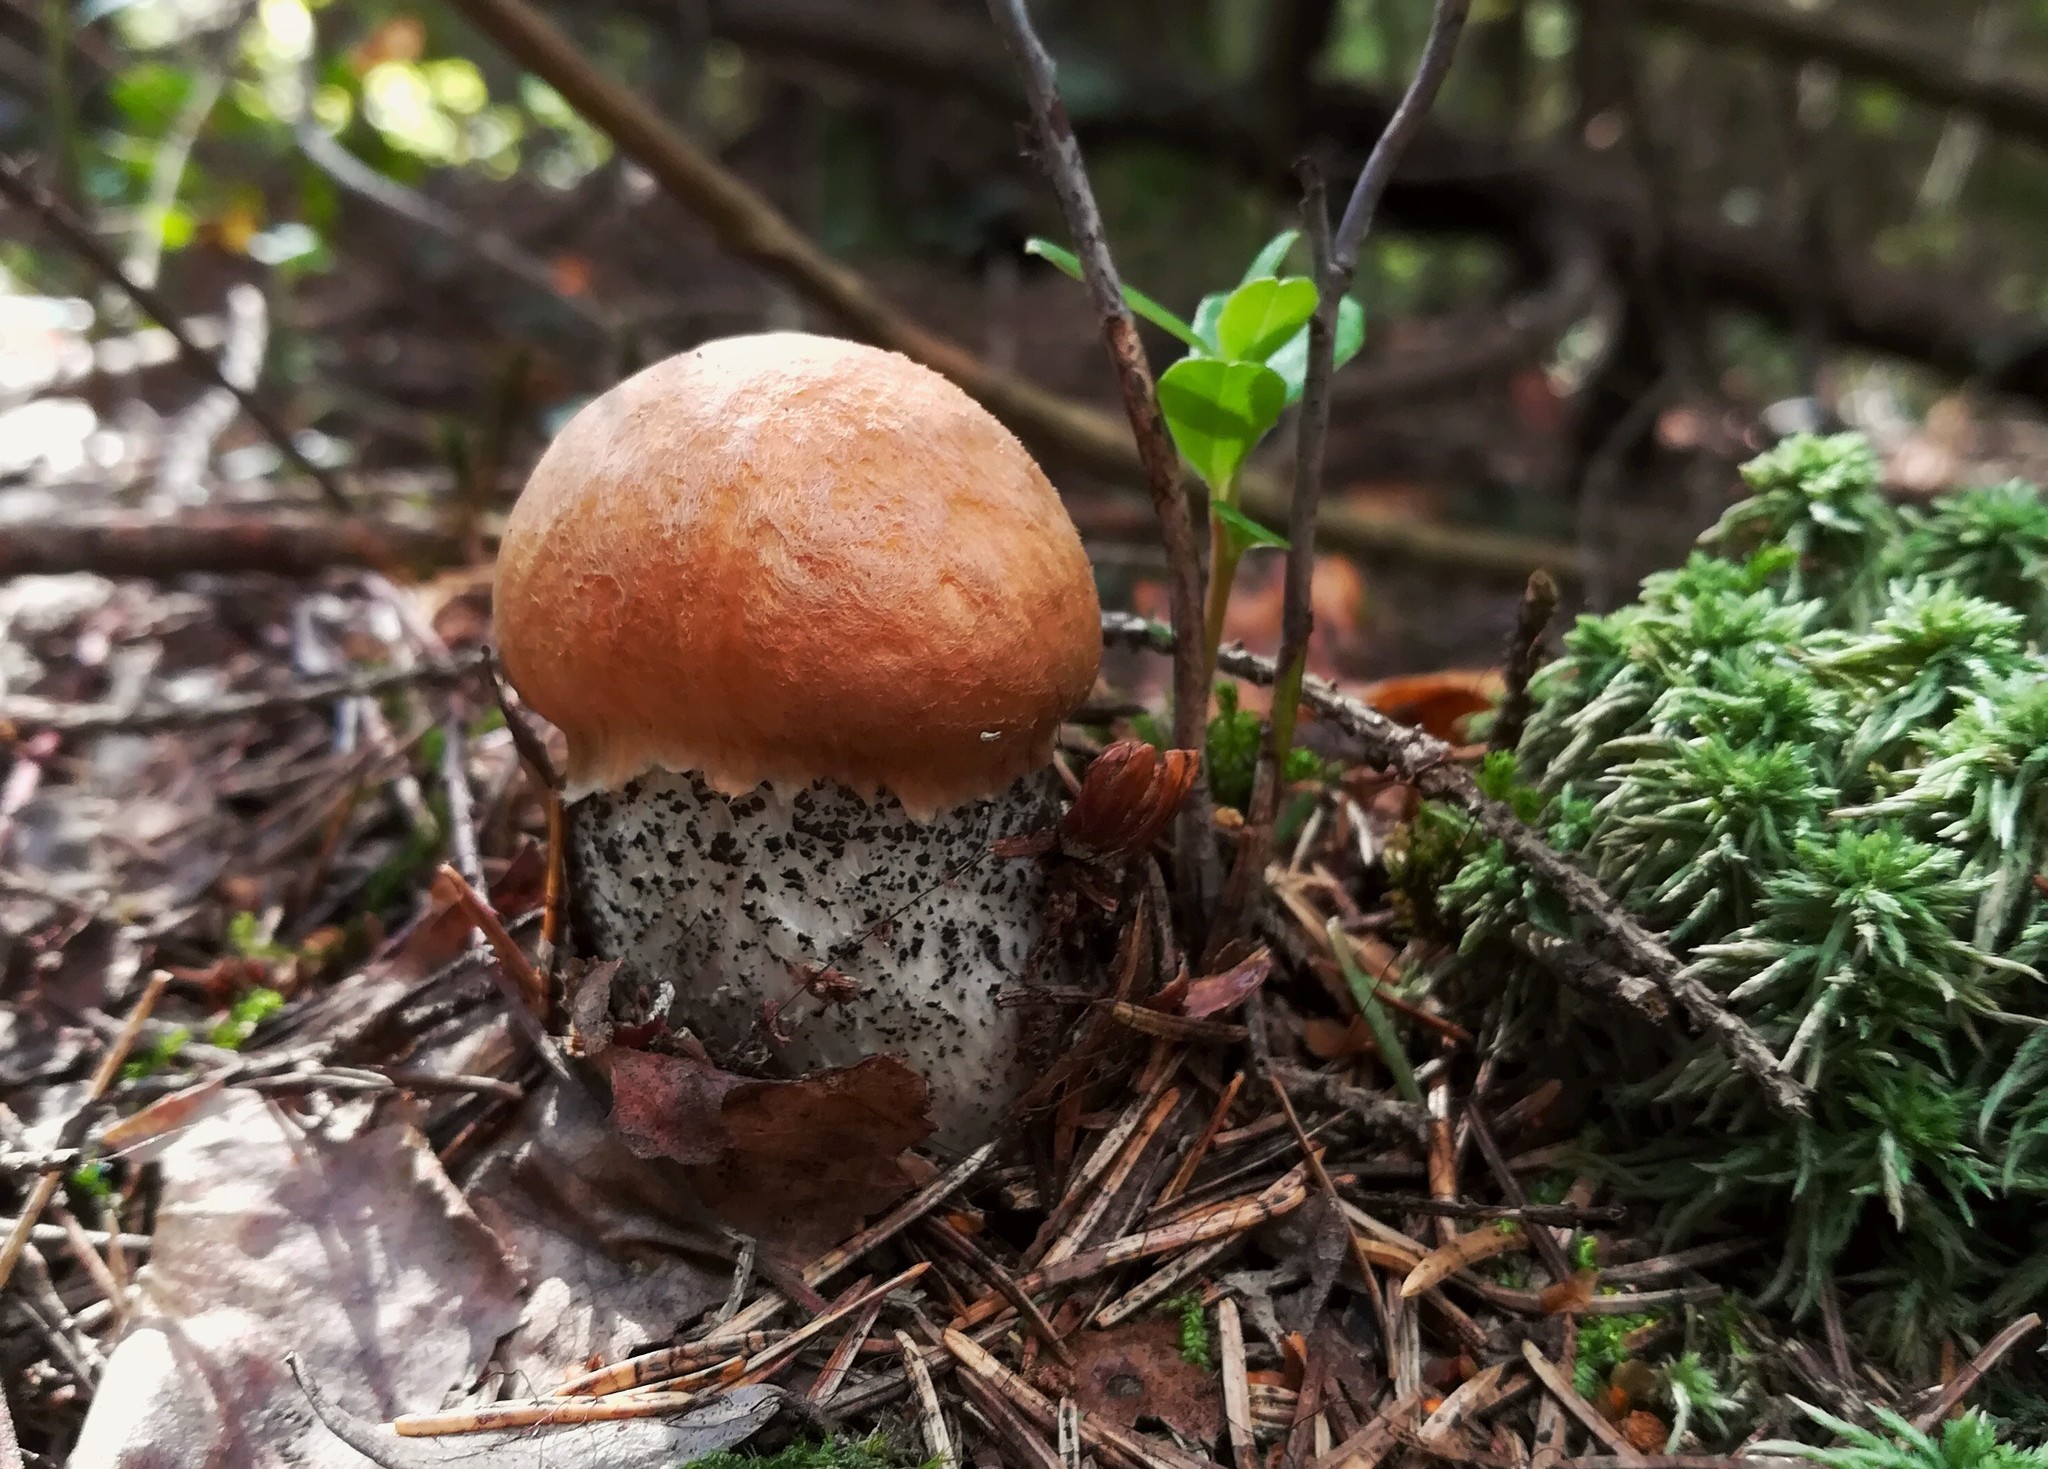 Back in the woods - Longpost, Boletus, Silent hunt, The photo, Forest, Mushrooms, My